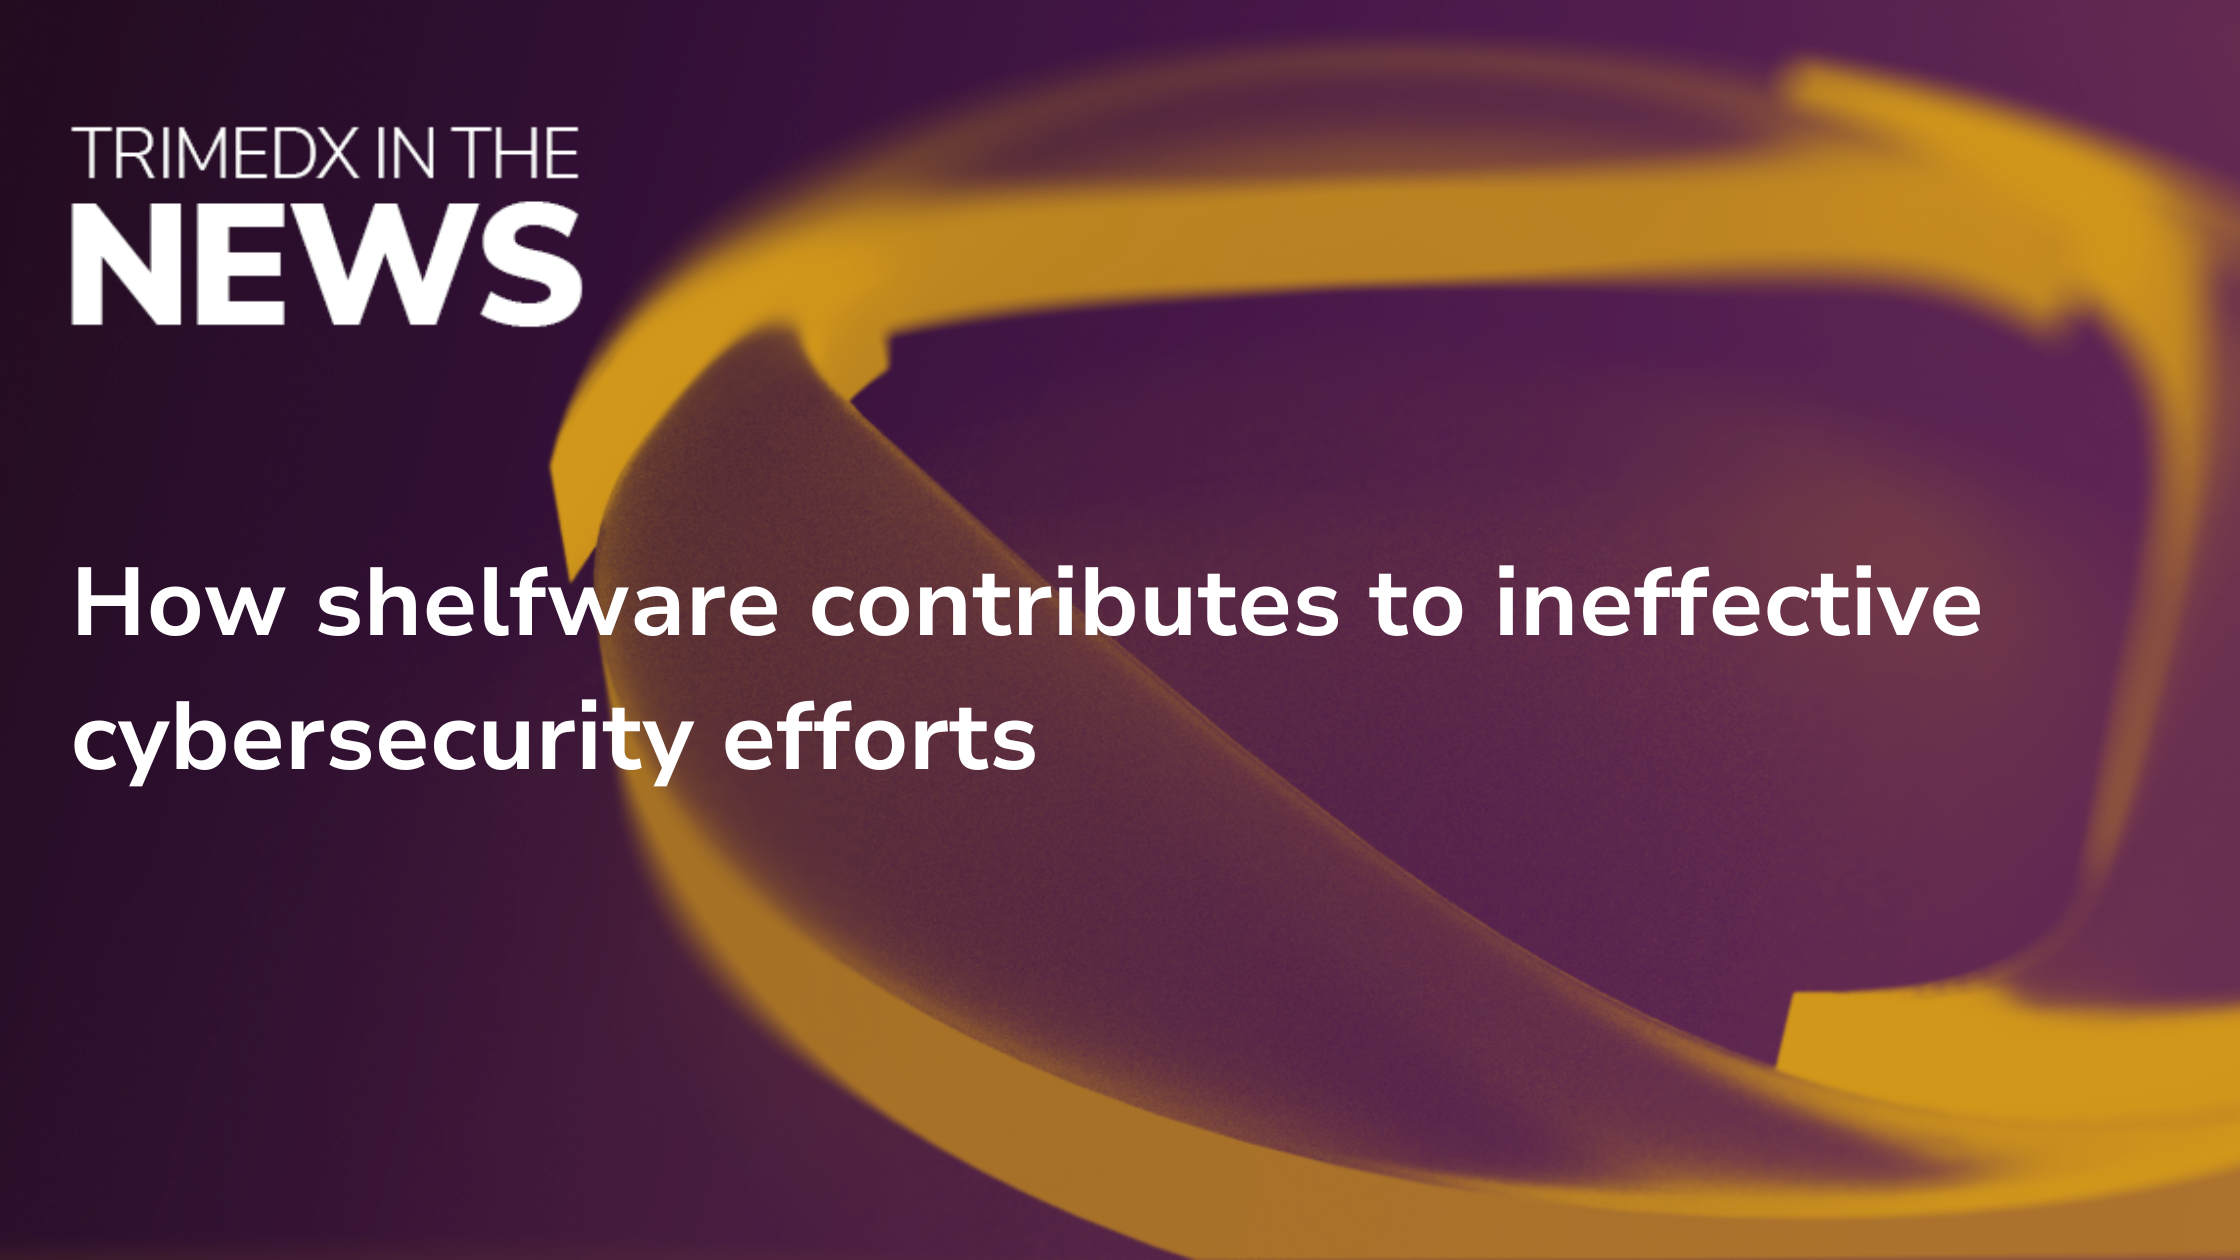 TRIMEDX in the News - How shelfware contributes to ineffective cybersecurity efforts